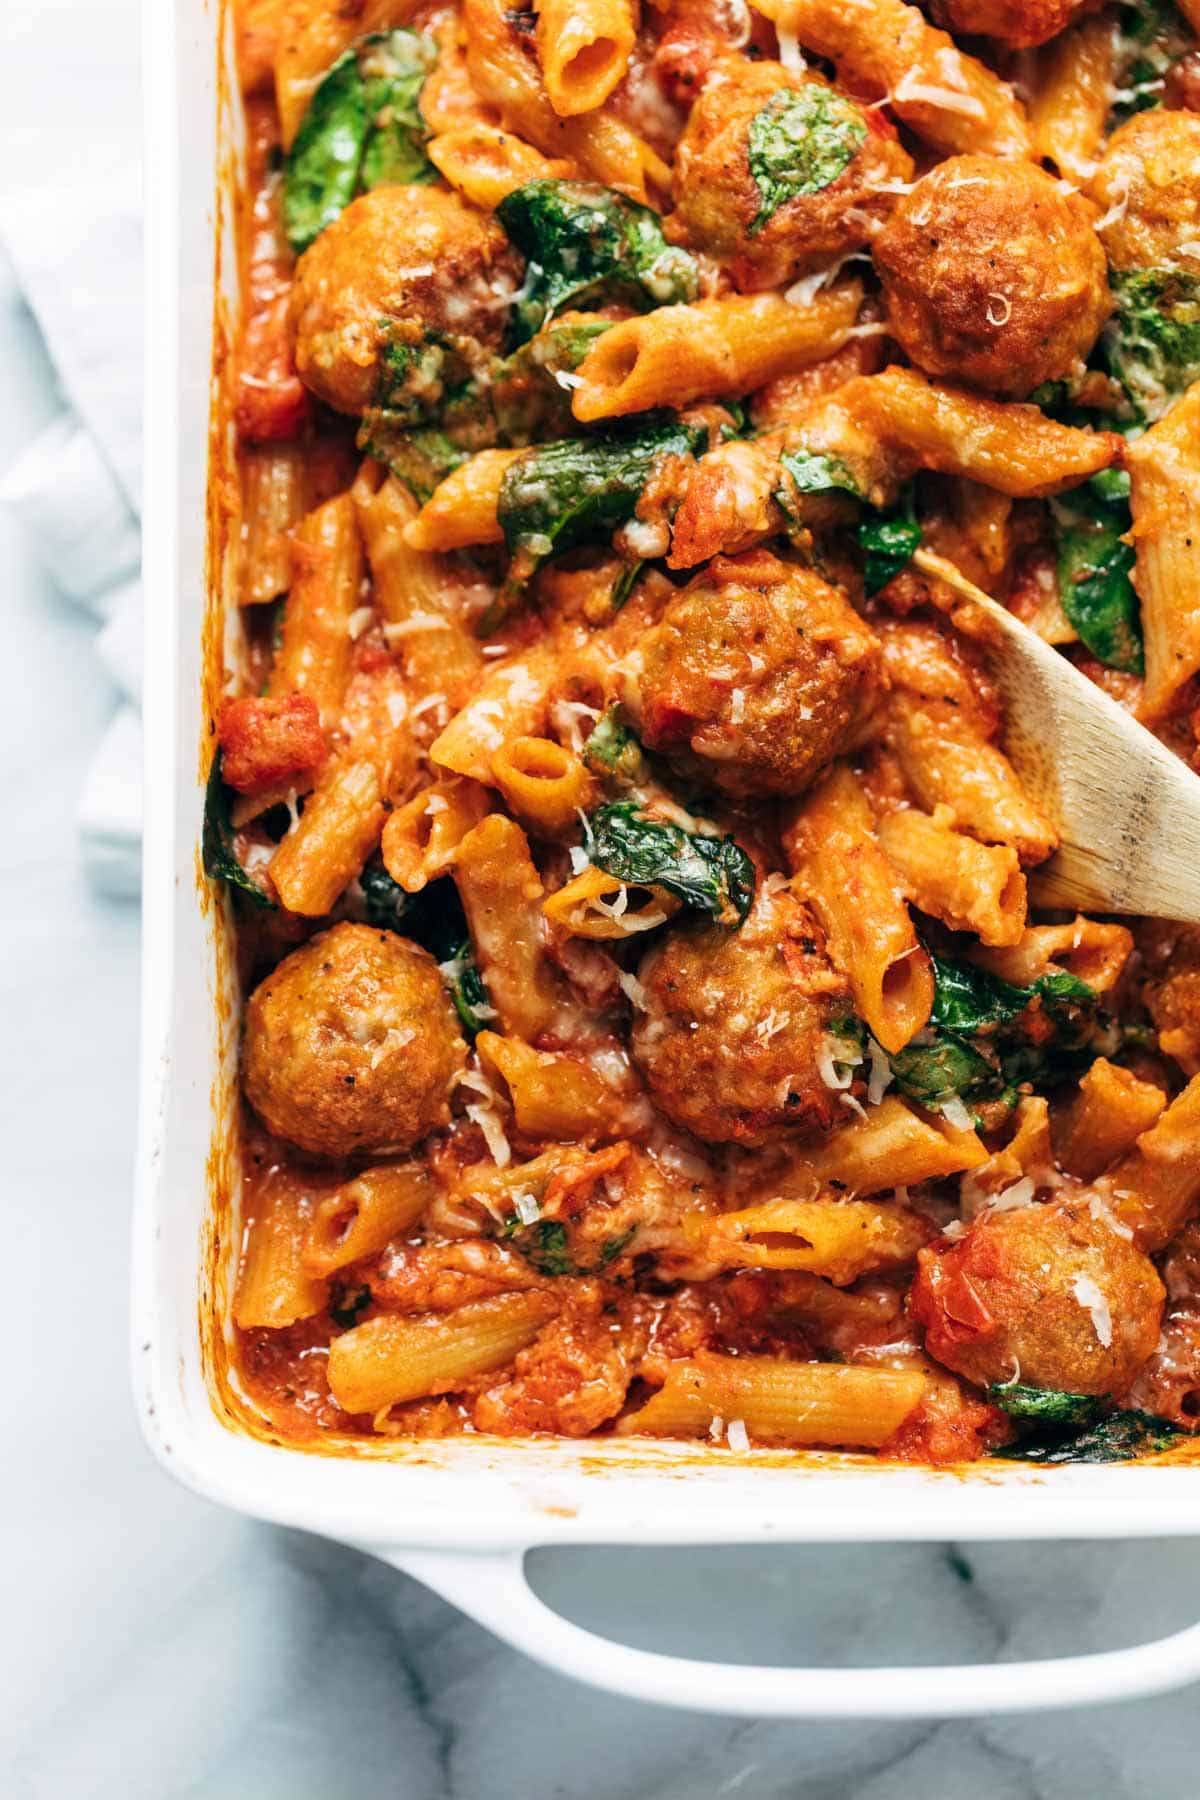 Baked penne with meatballs in a dish.